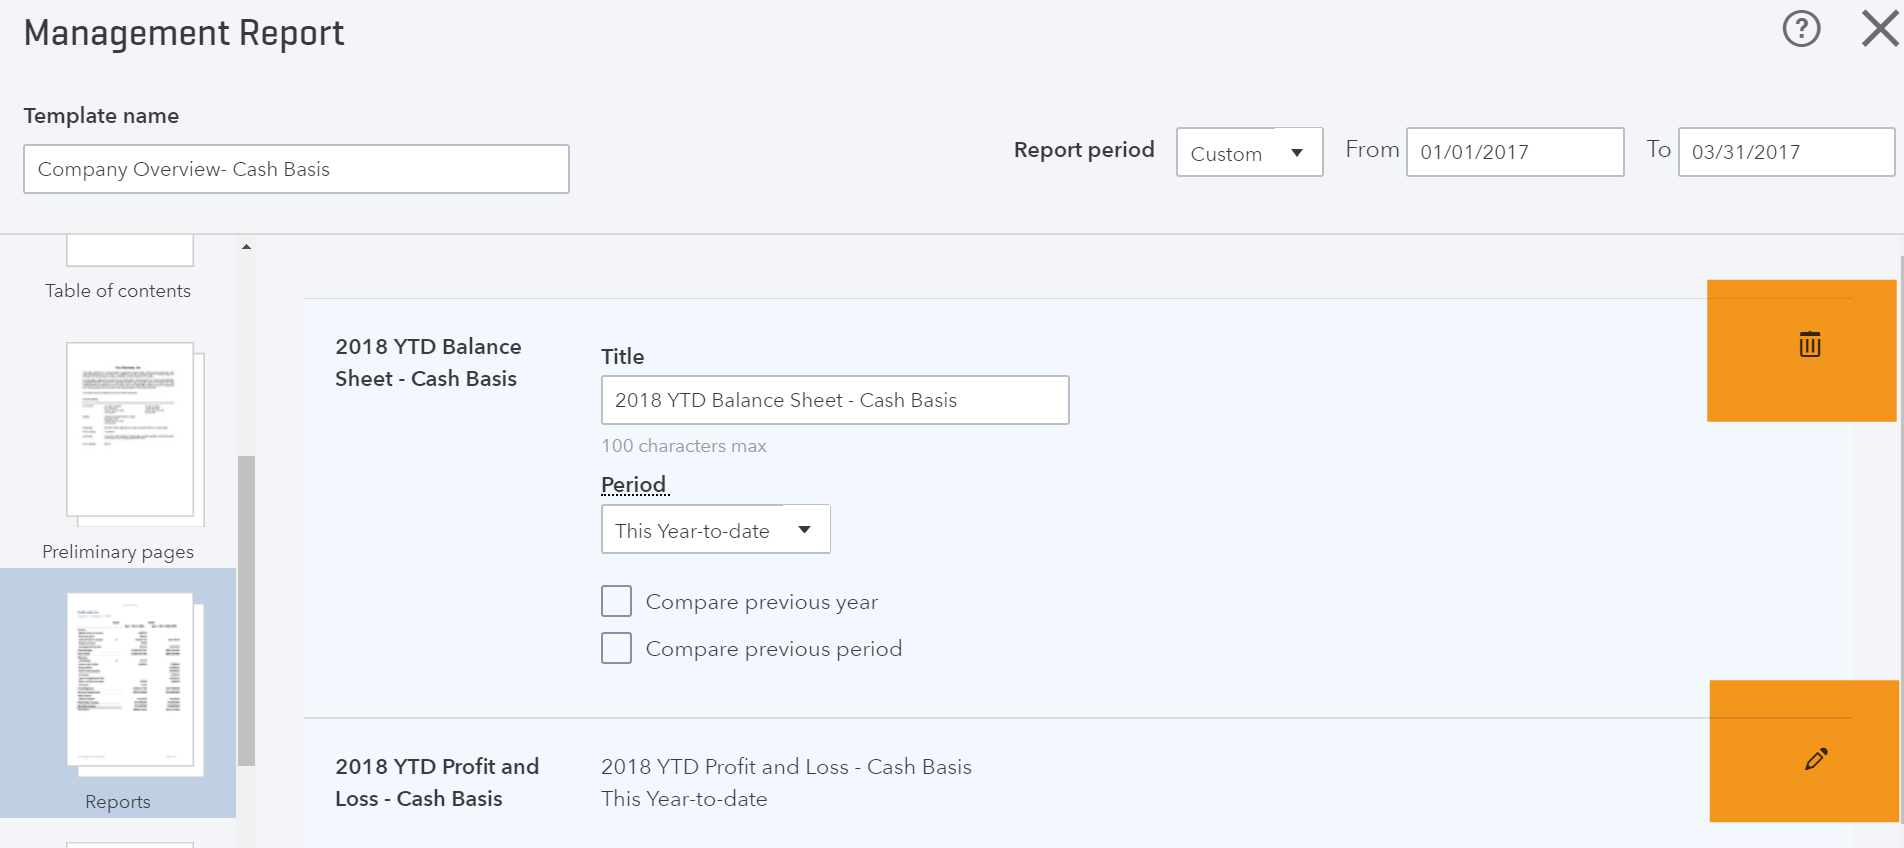 How to run QBO Manage Reports on Cash basis only